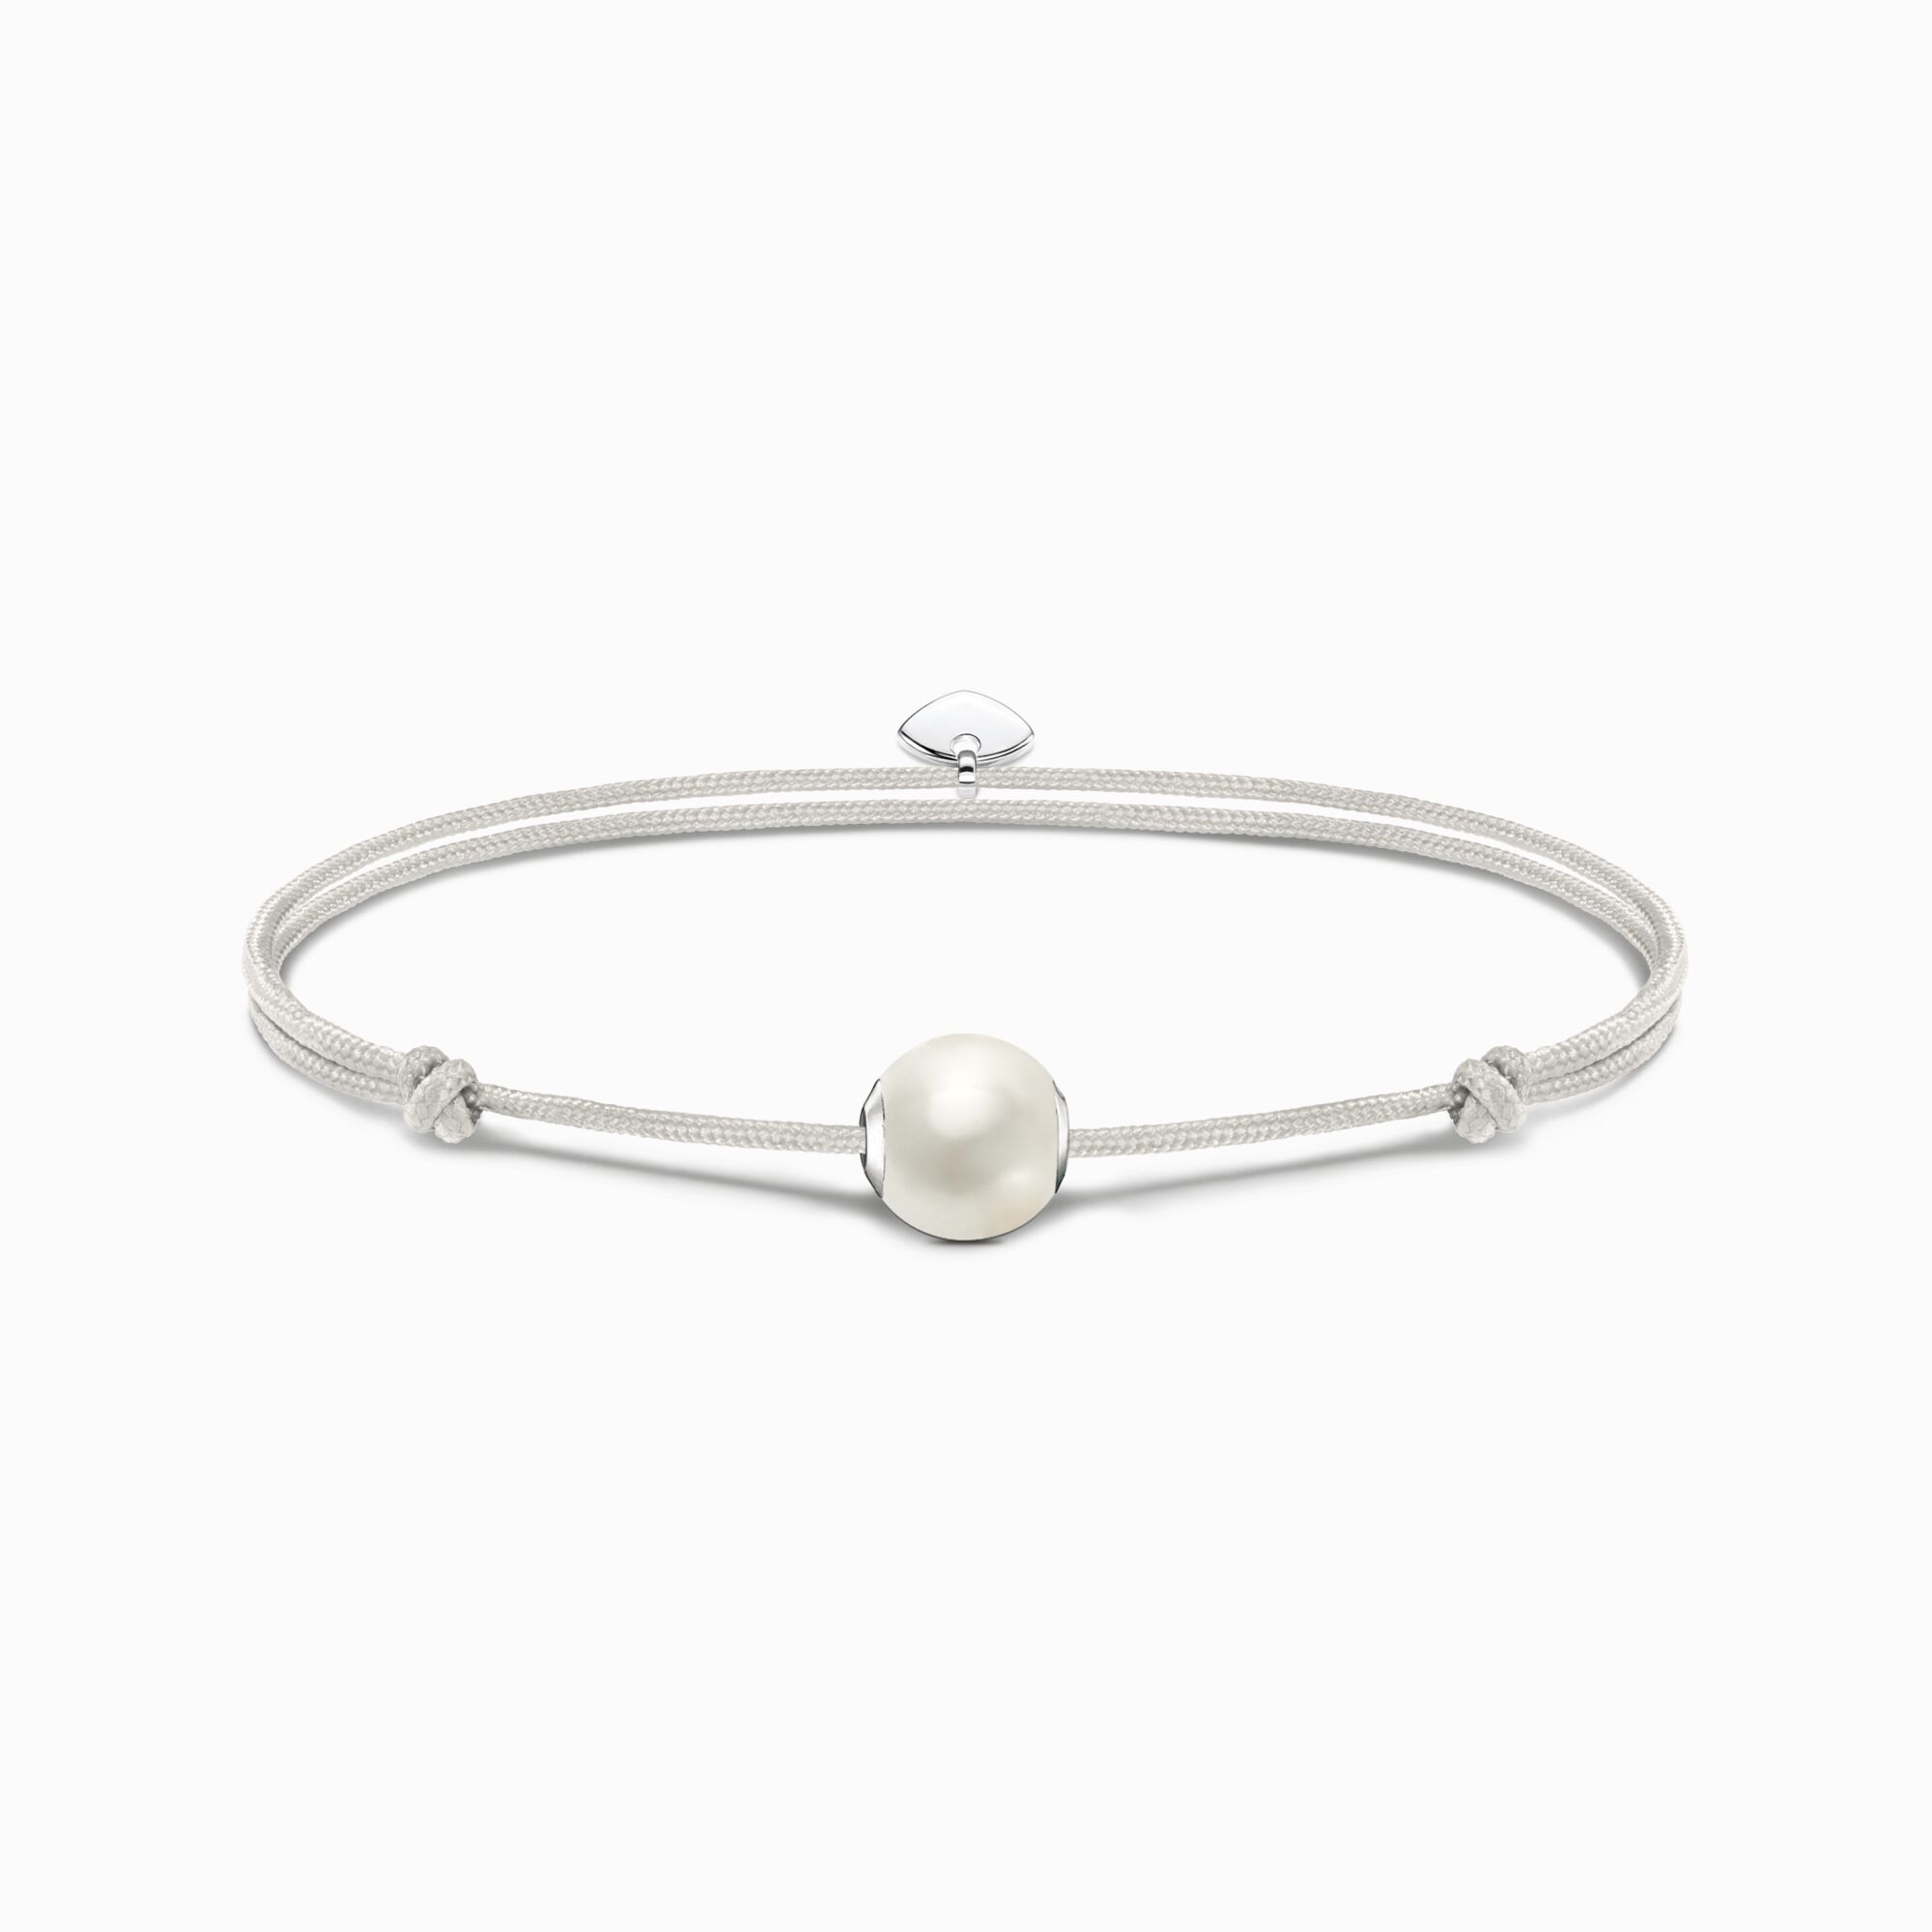 Bracelet Karma Secret with white freshwater pearl from the Karma Beads collection in the THOMAS SABO online store